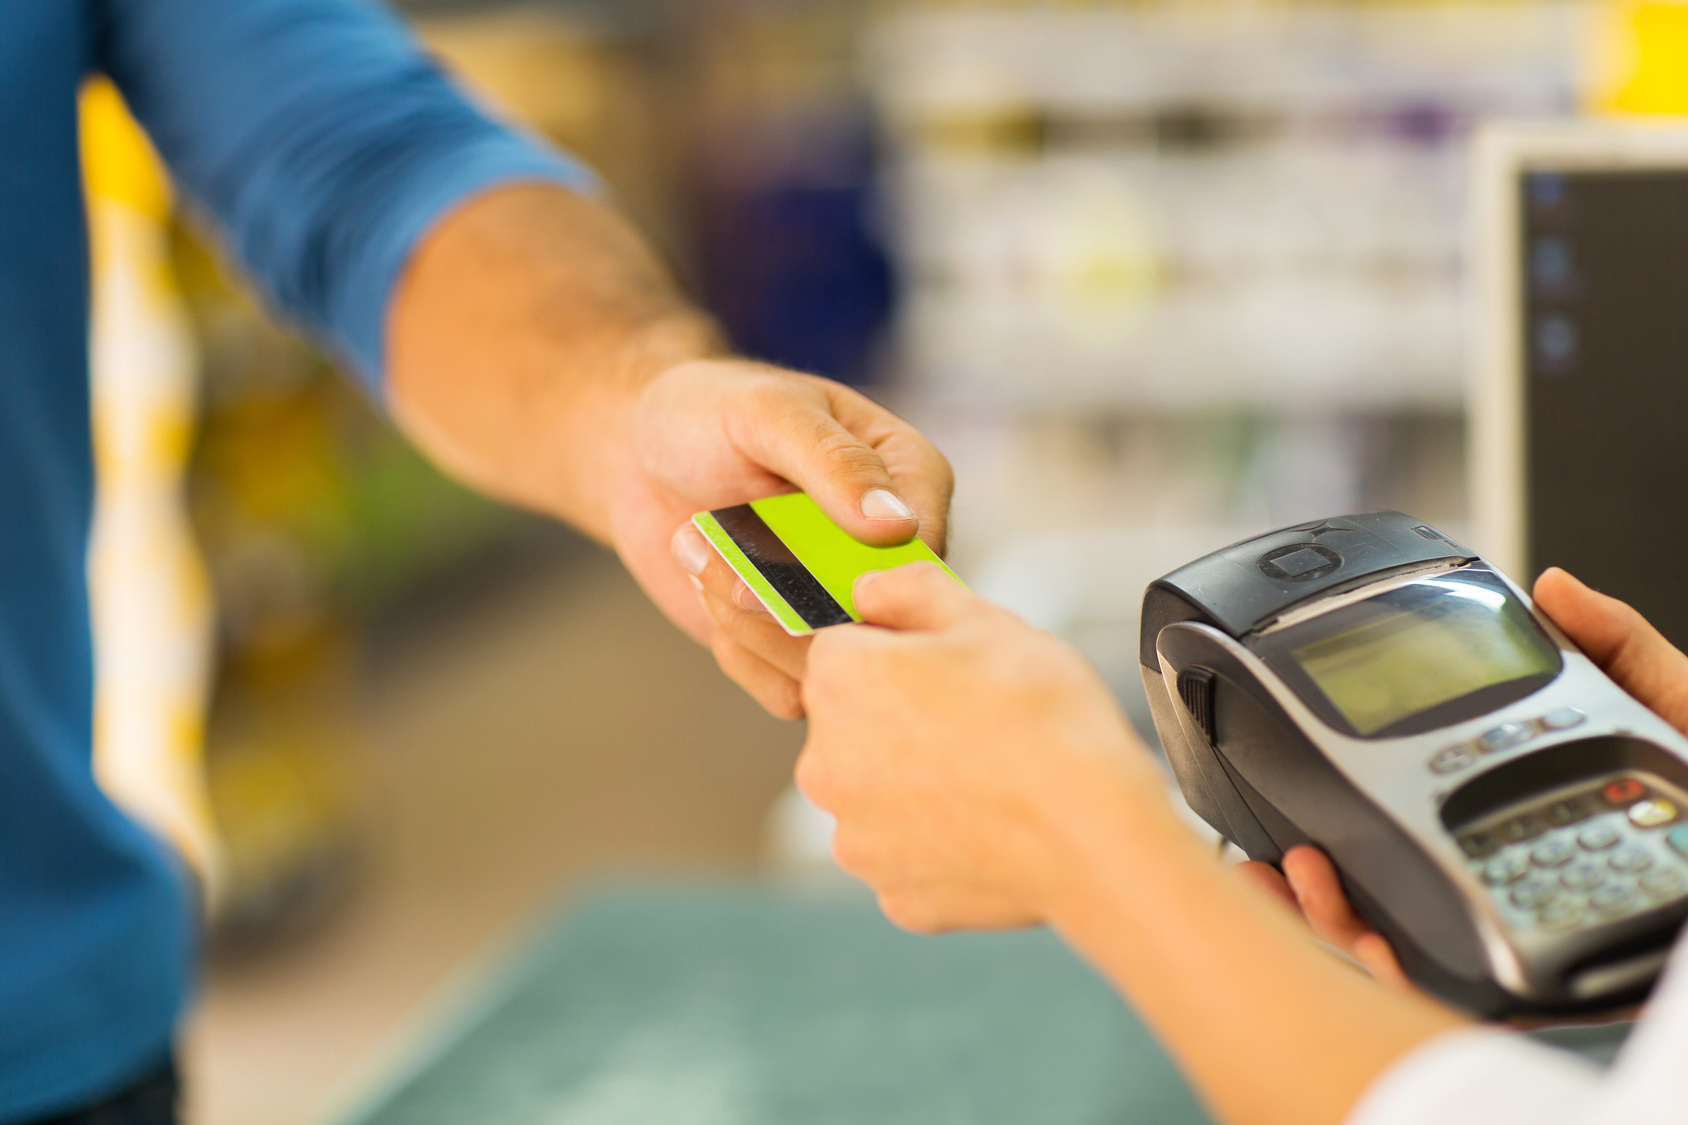 customer paying with credit card at supermarket